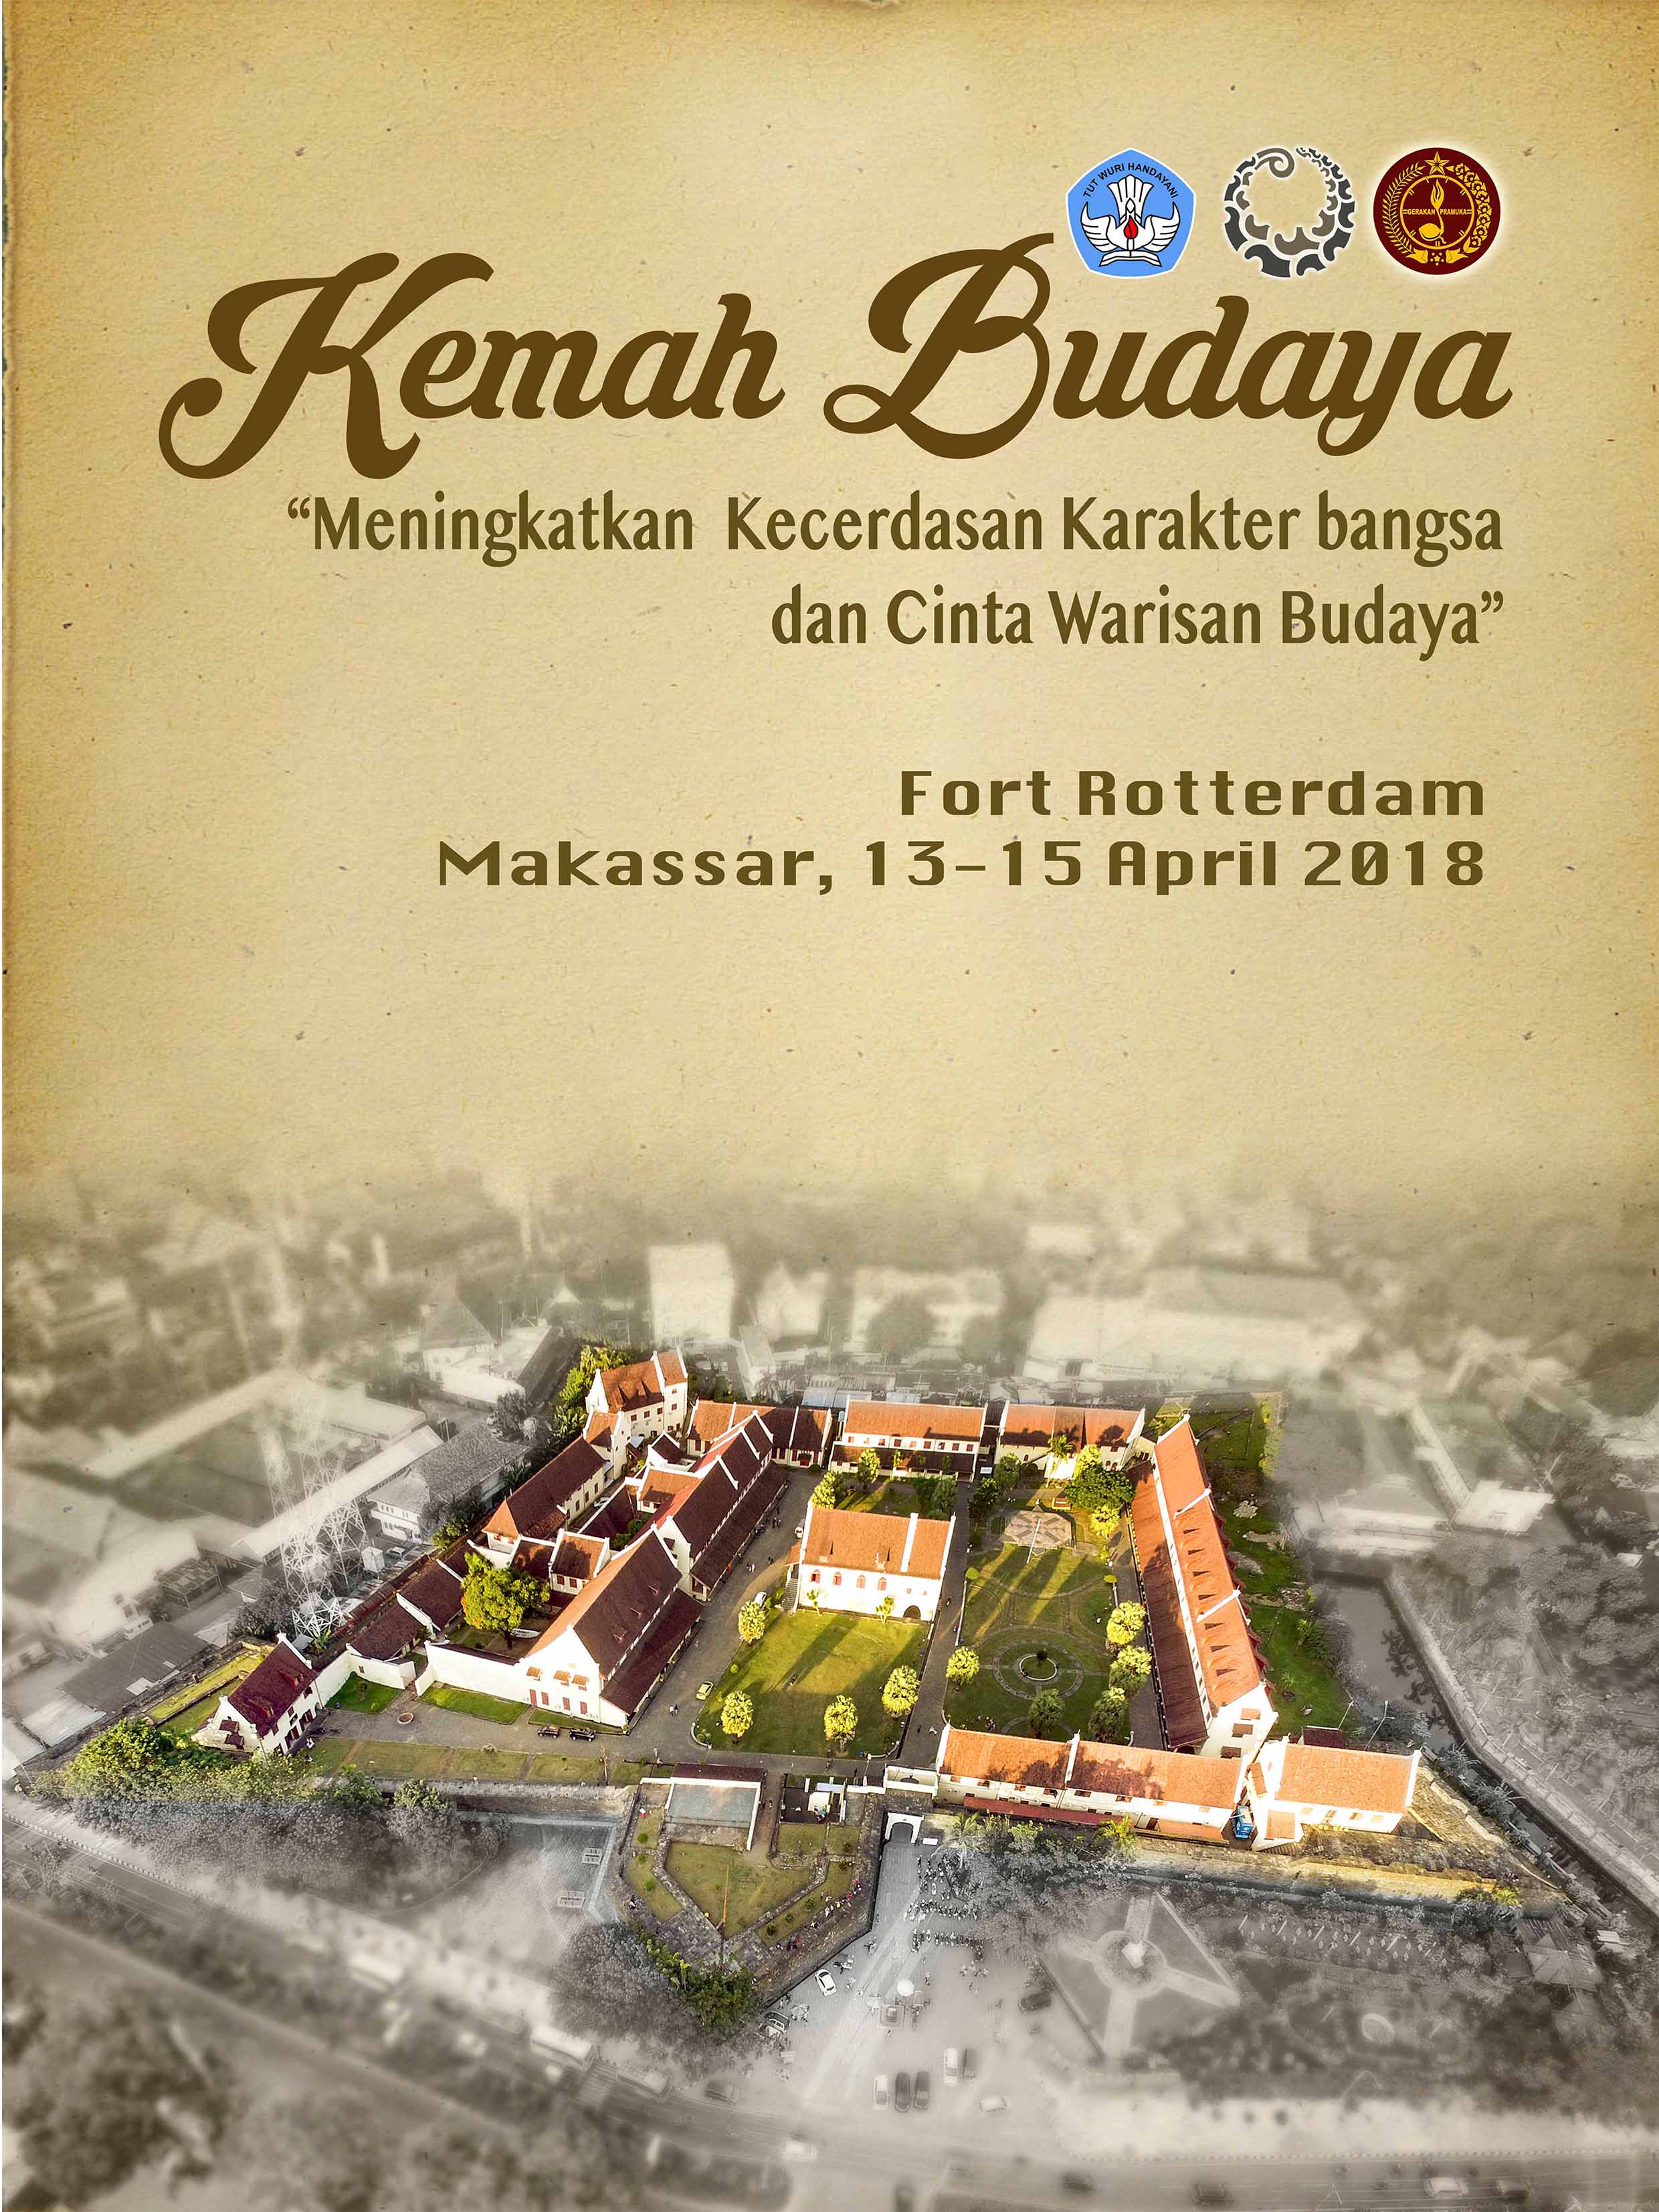 You are currently viewing Kemah Budaya 2018